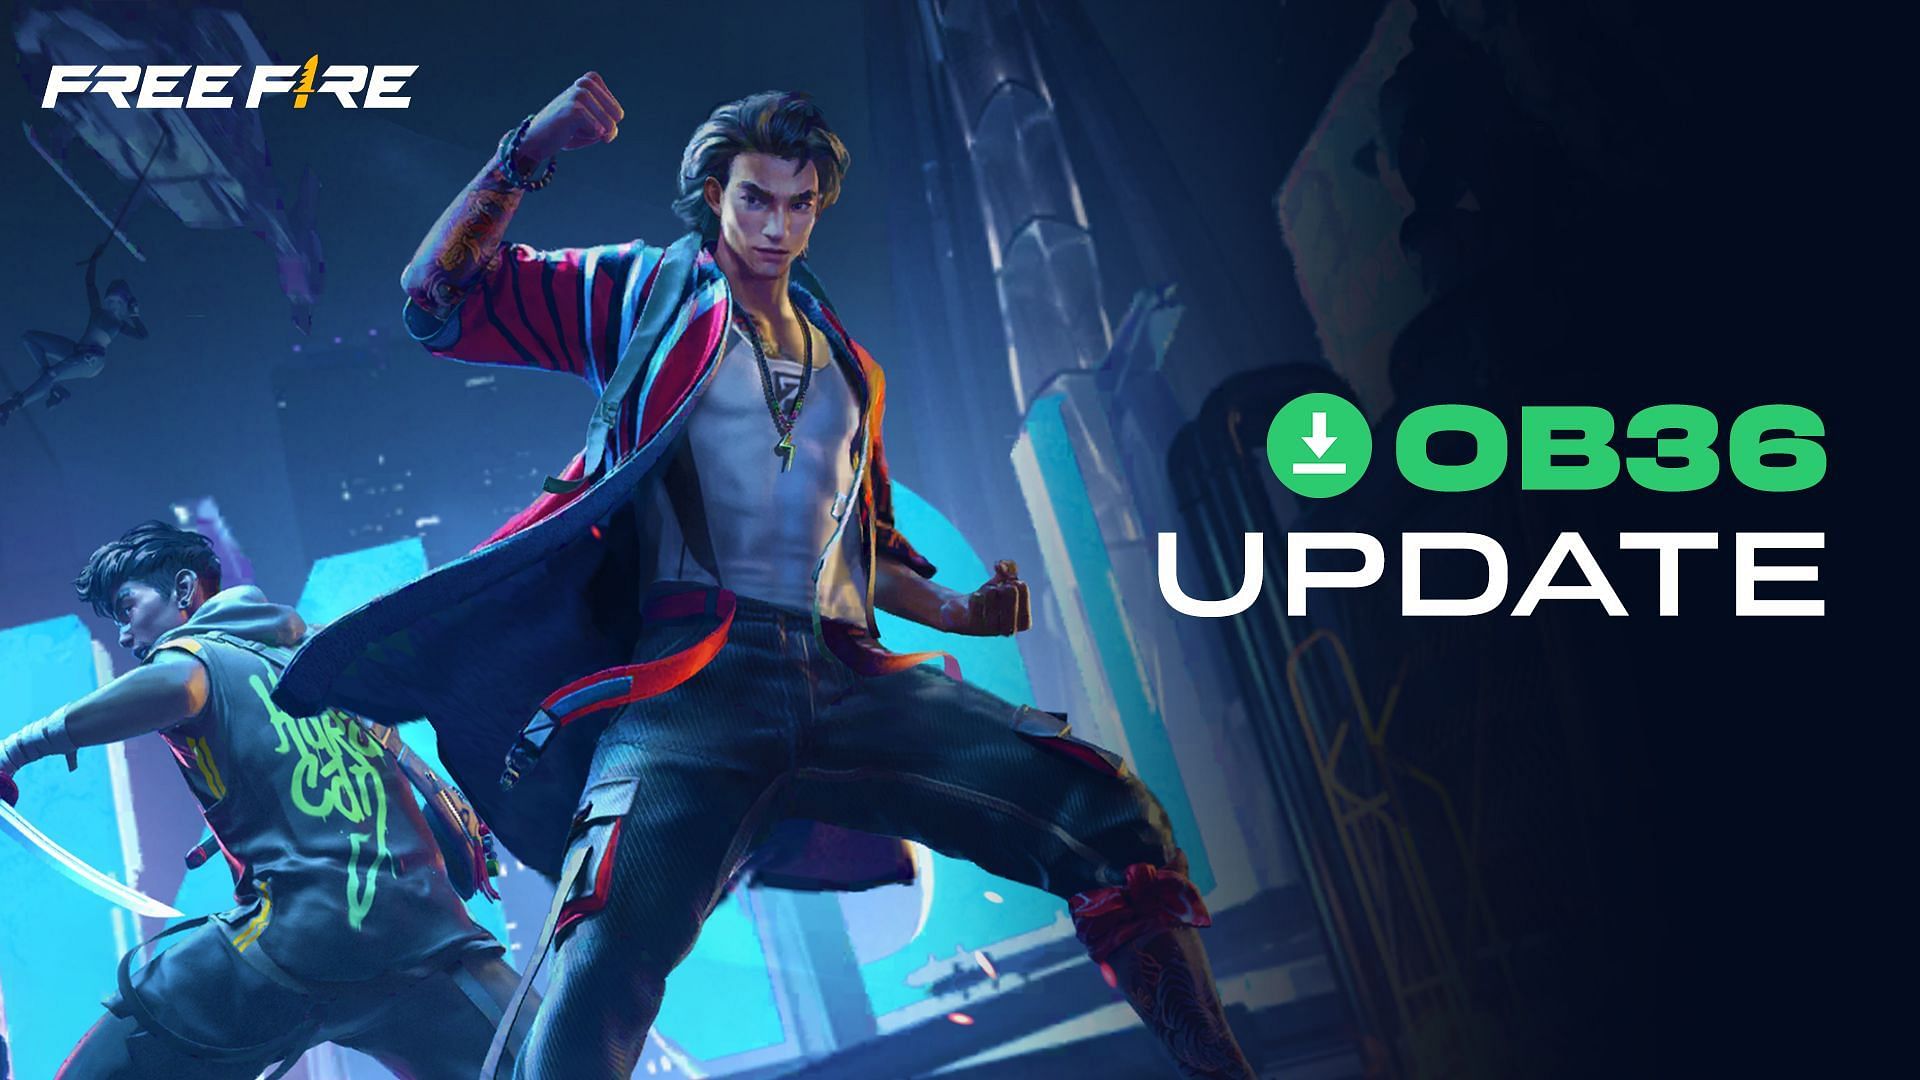 Gamers can download Free Fire OB36 update through the Google Play Store (Image via Sportskeeda)